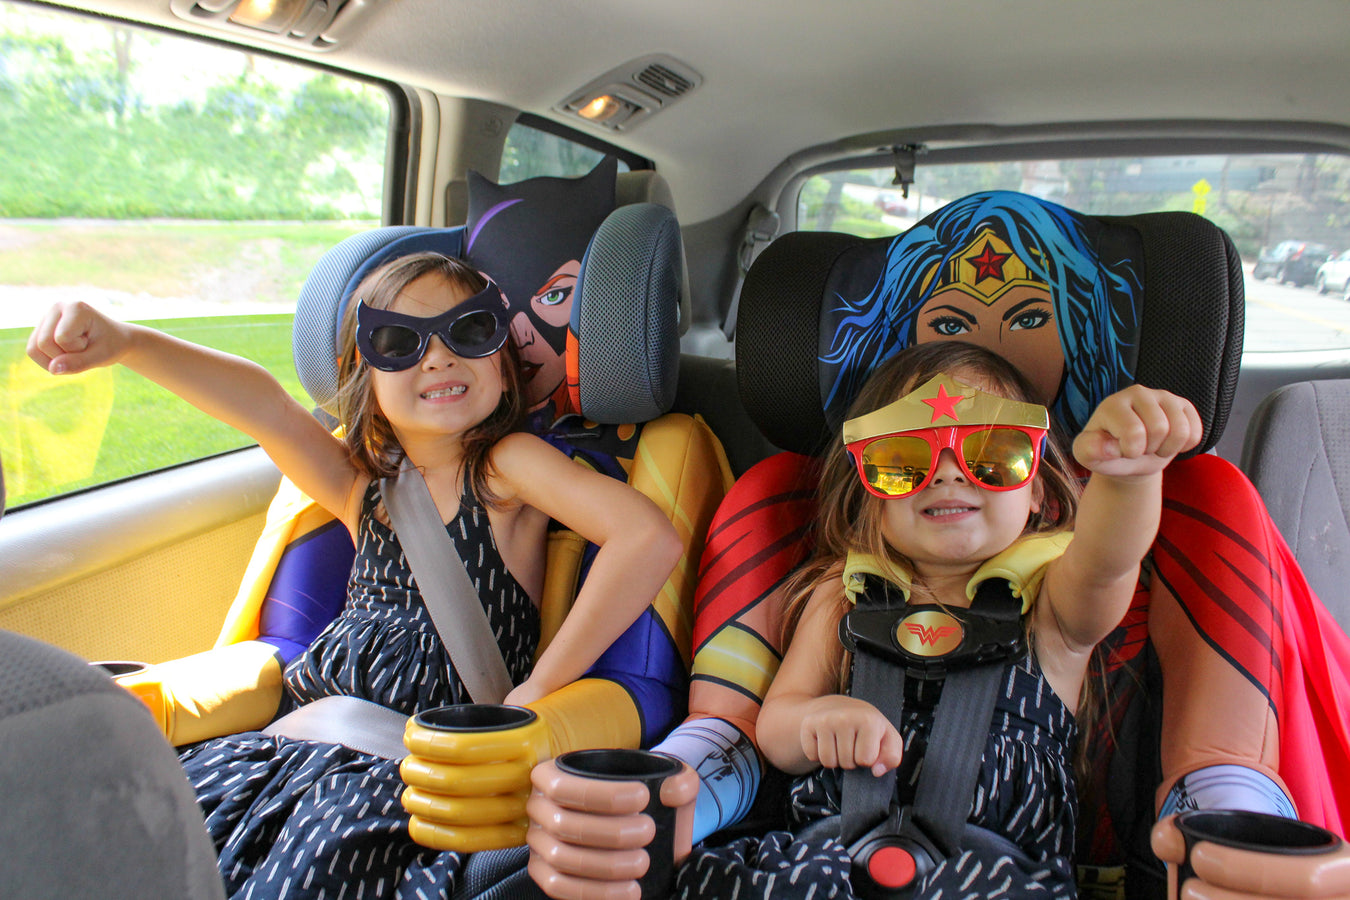 Wonder Woman car seat with kids sitting in them.